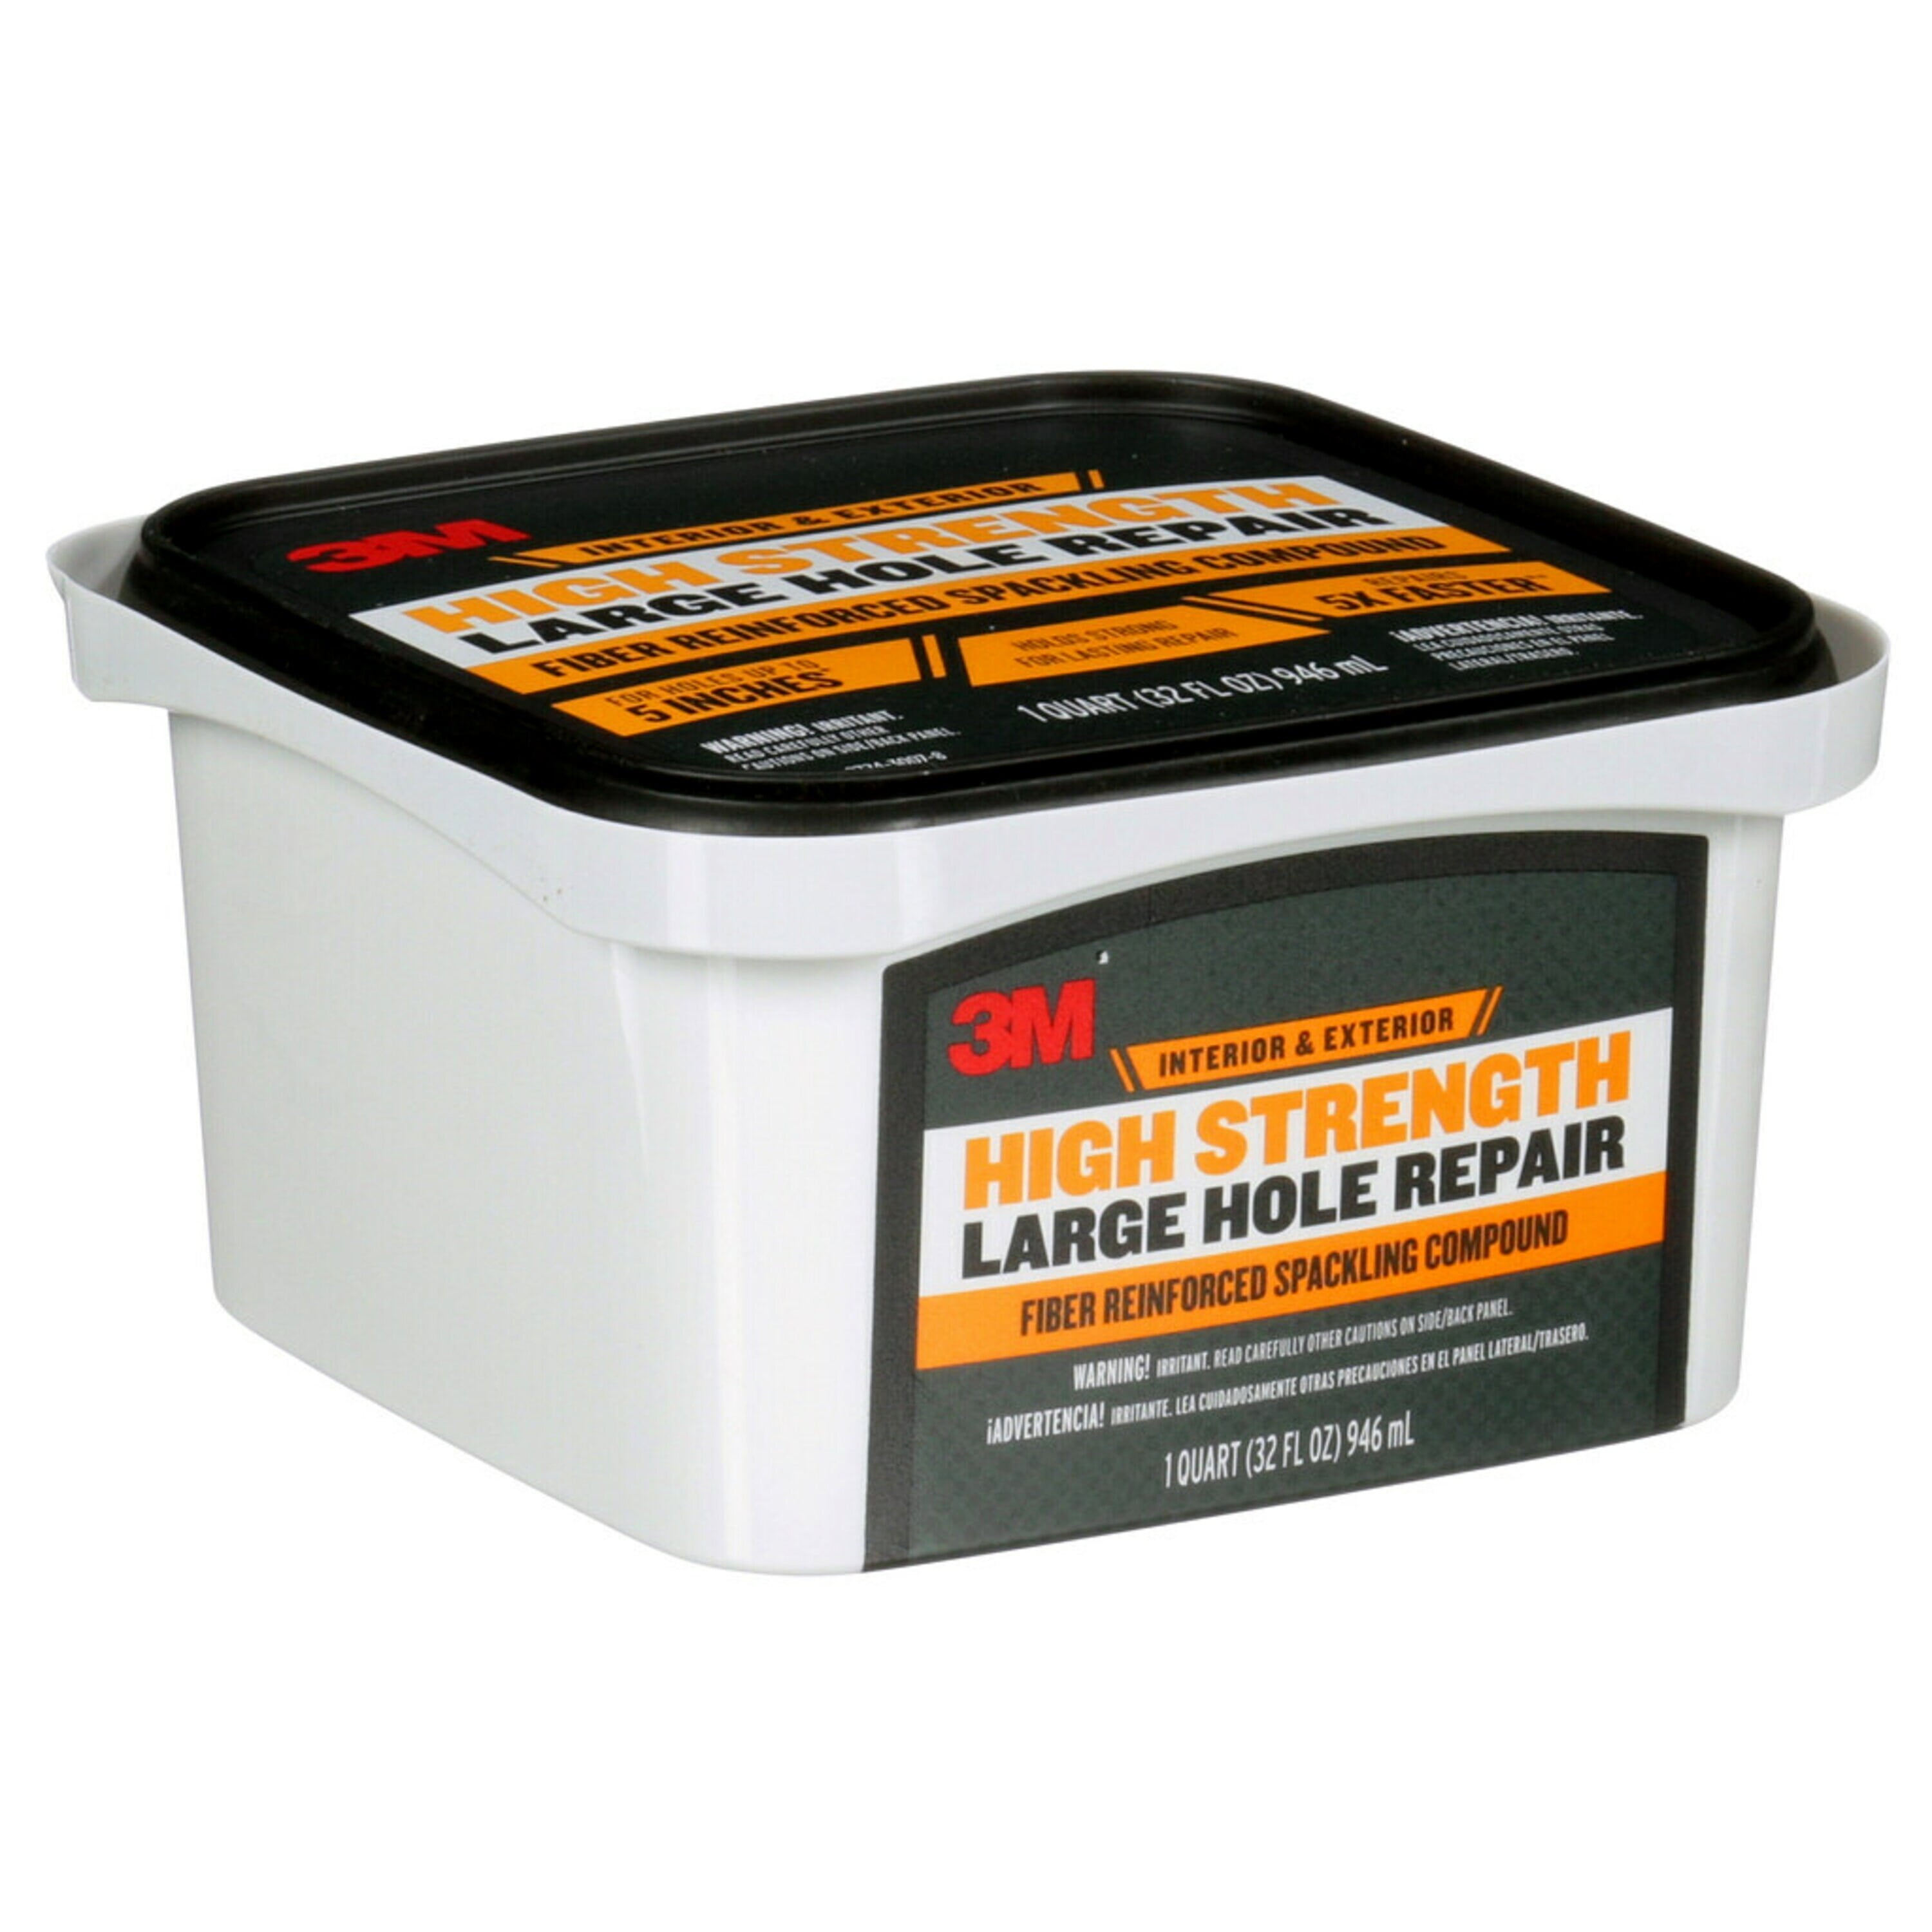 3M High Strength 32 Wall Use, oz. Reinforced, Interior Fiber Large Hole Exterior Filler, White, and